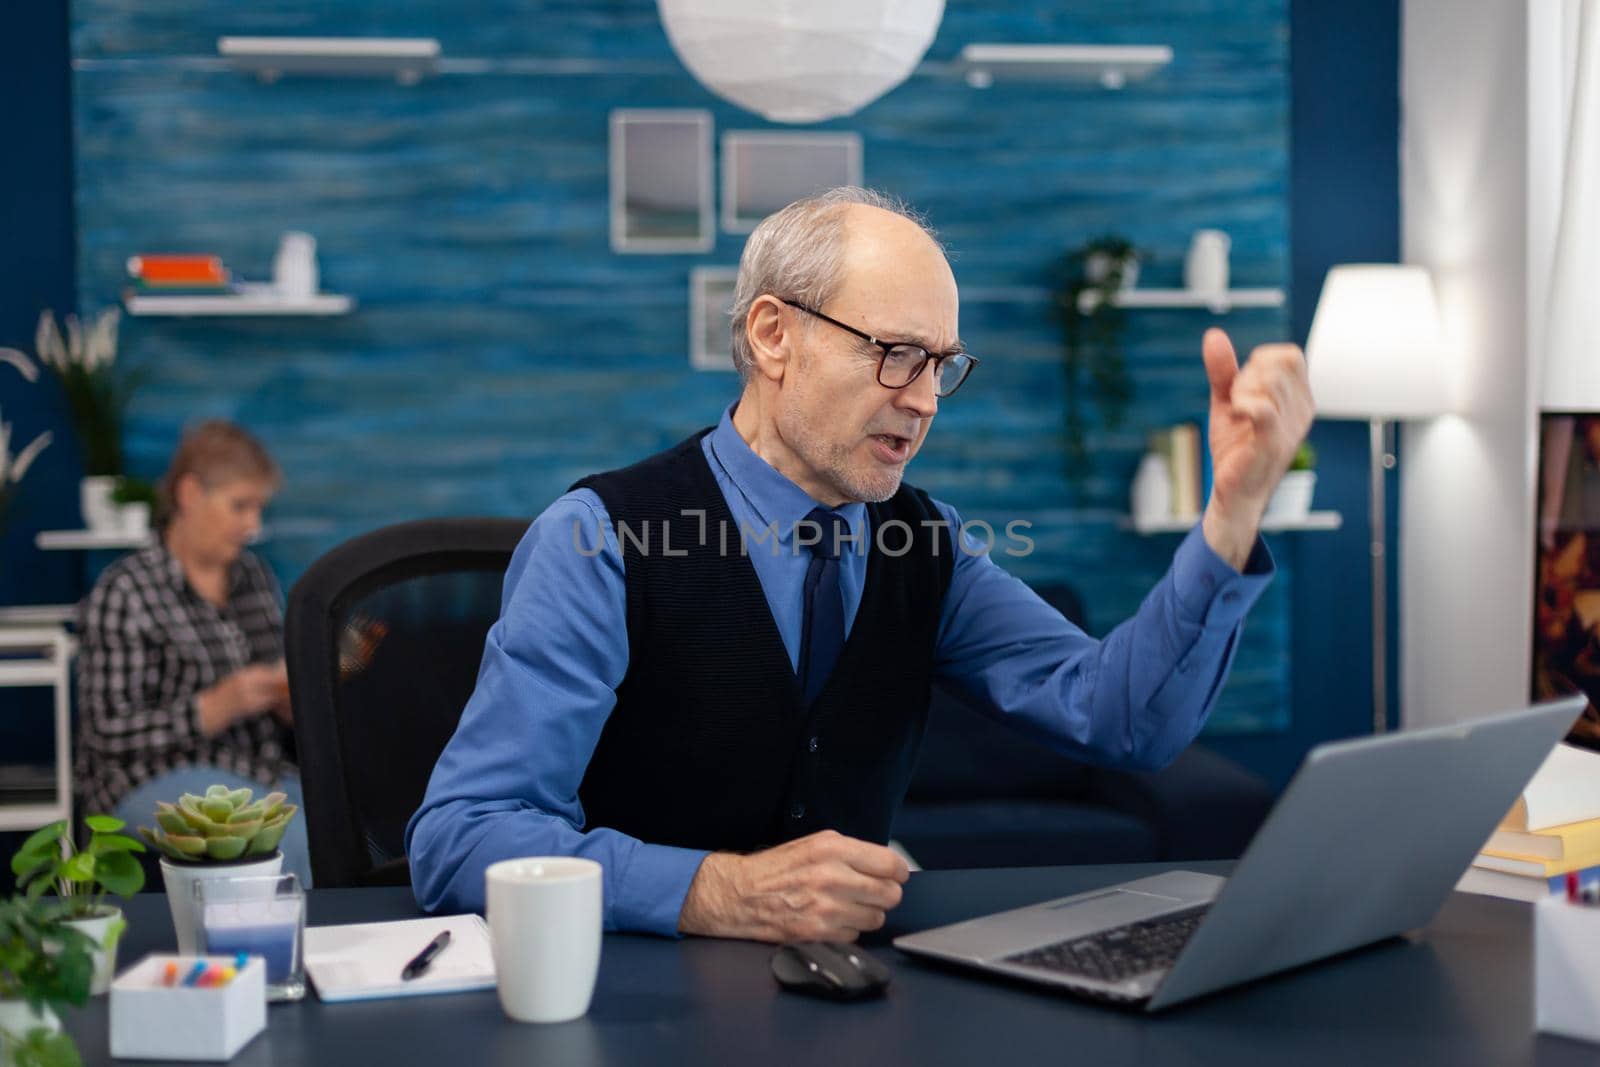 Excited senior man celebrating good news while working on laptop from home office. Elderly man entrepreneur in home workplace using portable computer sitting at desk while wife is reading a book sitting on sofa.